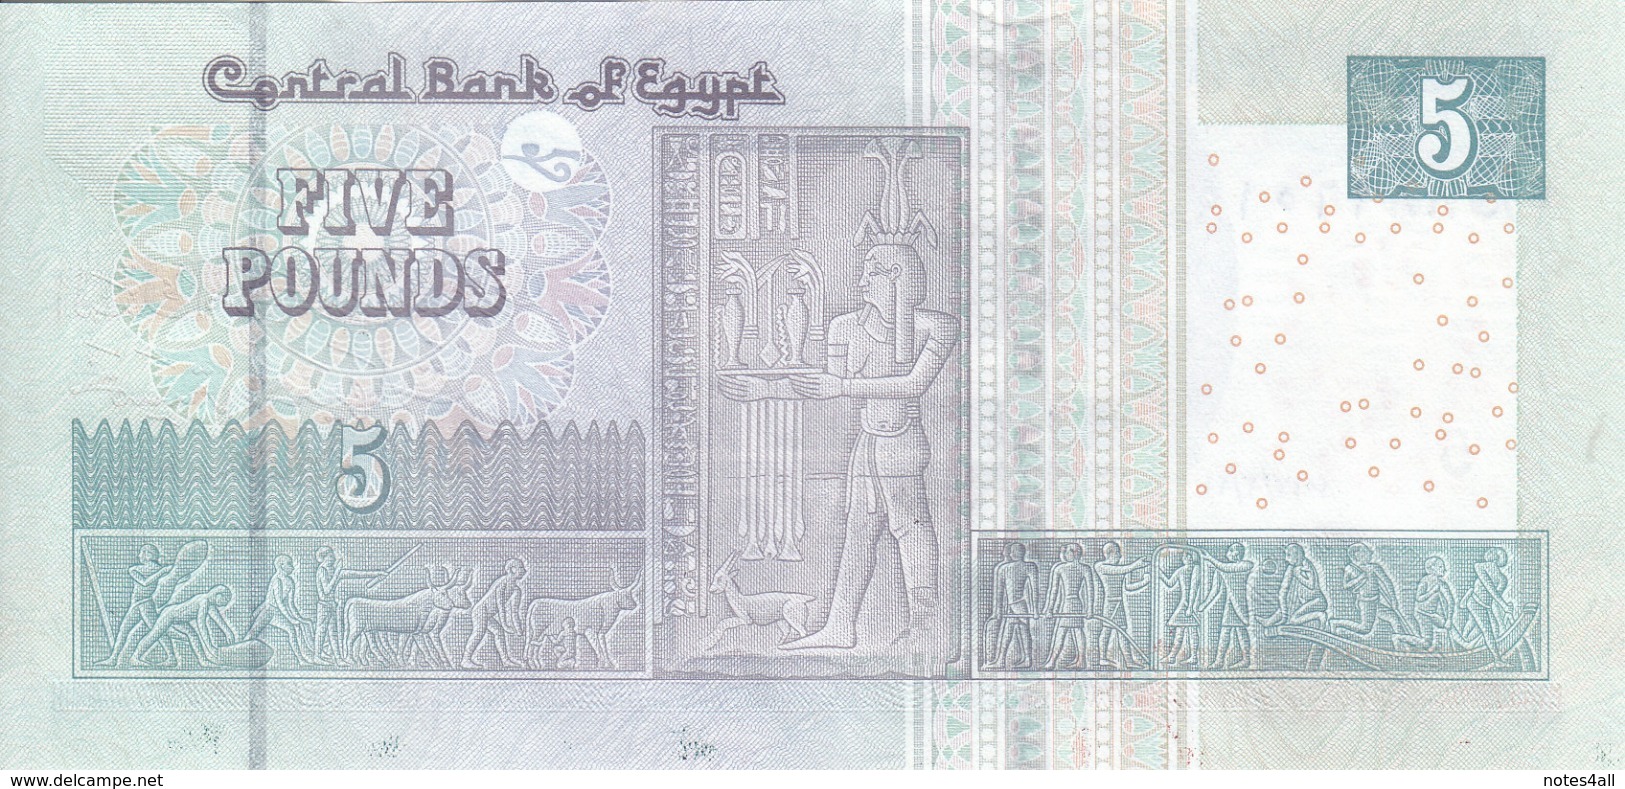 EGYPT 5 POUNDS EGP 2017 P-70b SIG/ T.AMER #24 UNC REPLACEMENT 900 (SPACE OUT) SPACING - Aegypten